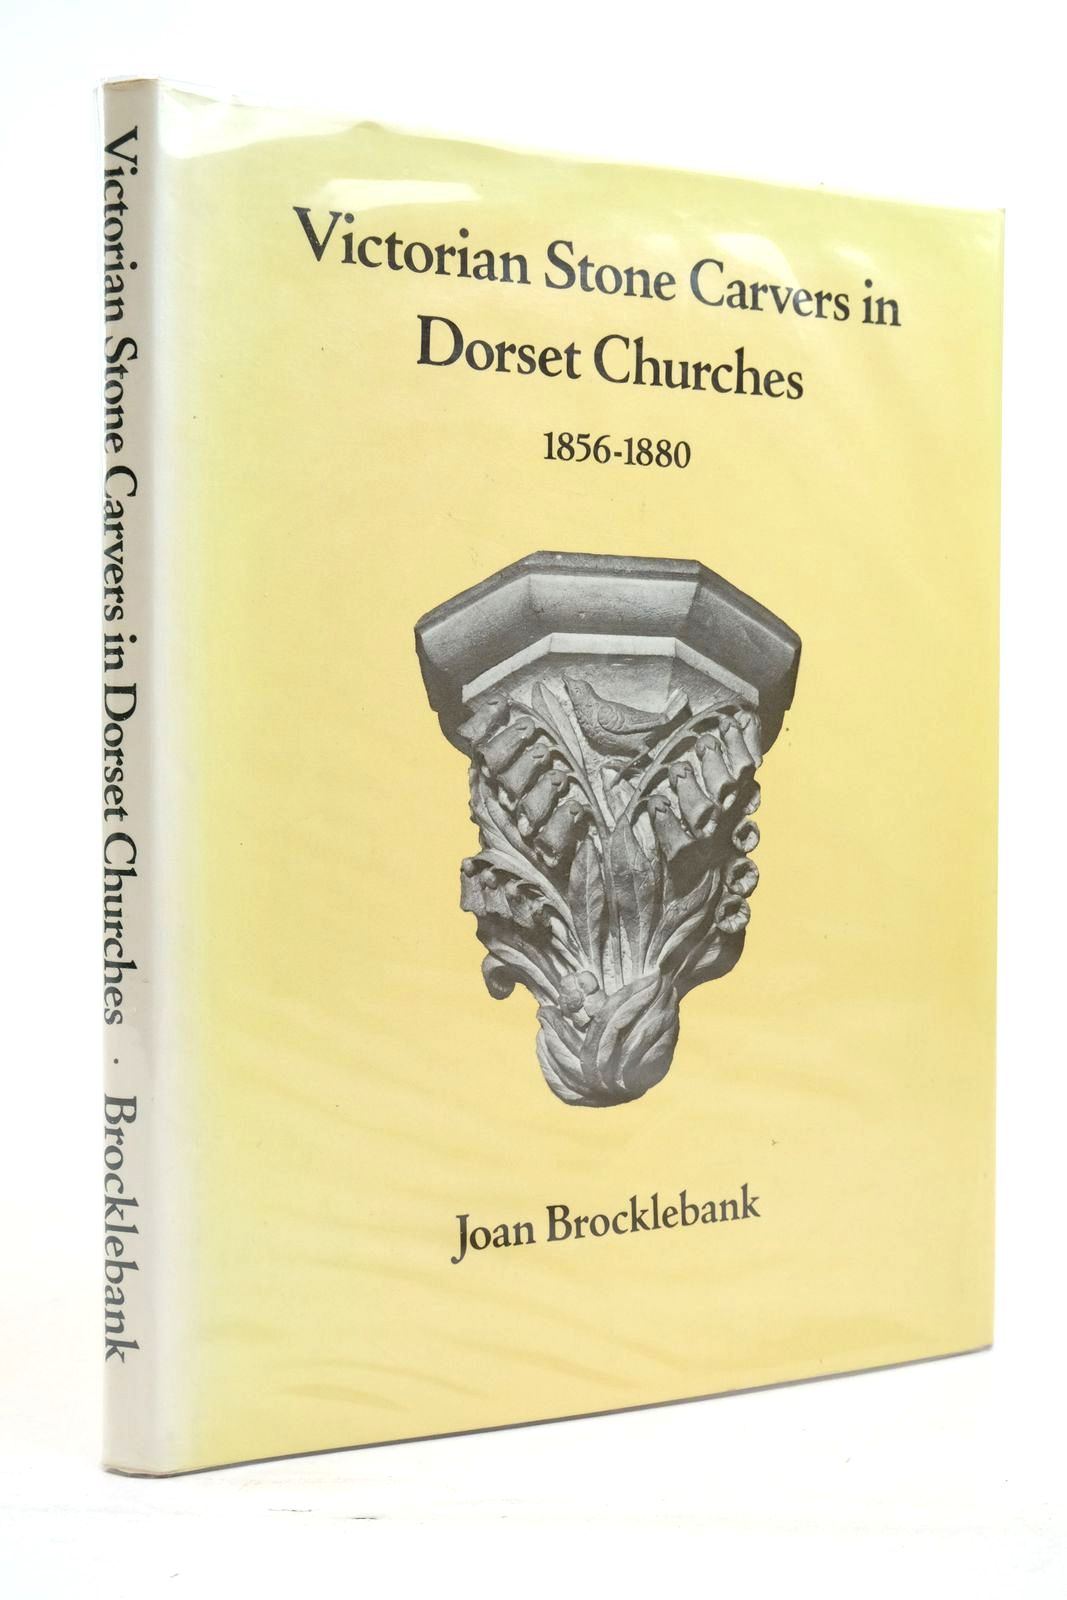 Photo of VICTORIAN STONE CARVERS IN DORSET CHURCHES 1856-1880 written by Brocklebank, Joan published by Dovecote Press (STOCK CODE: 2137654)  for sale by Stella & Rose's Books